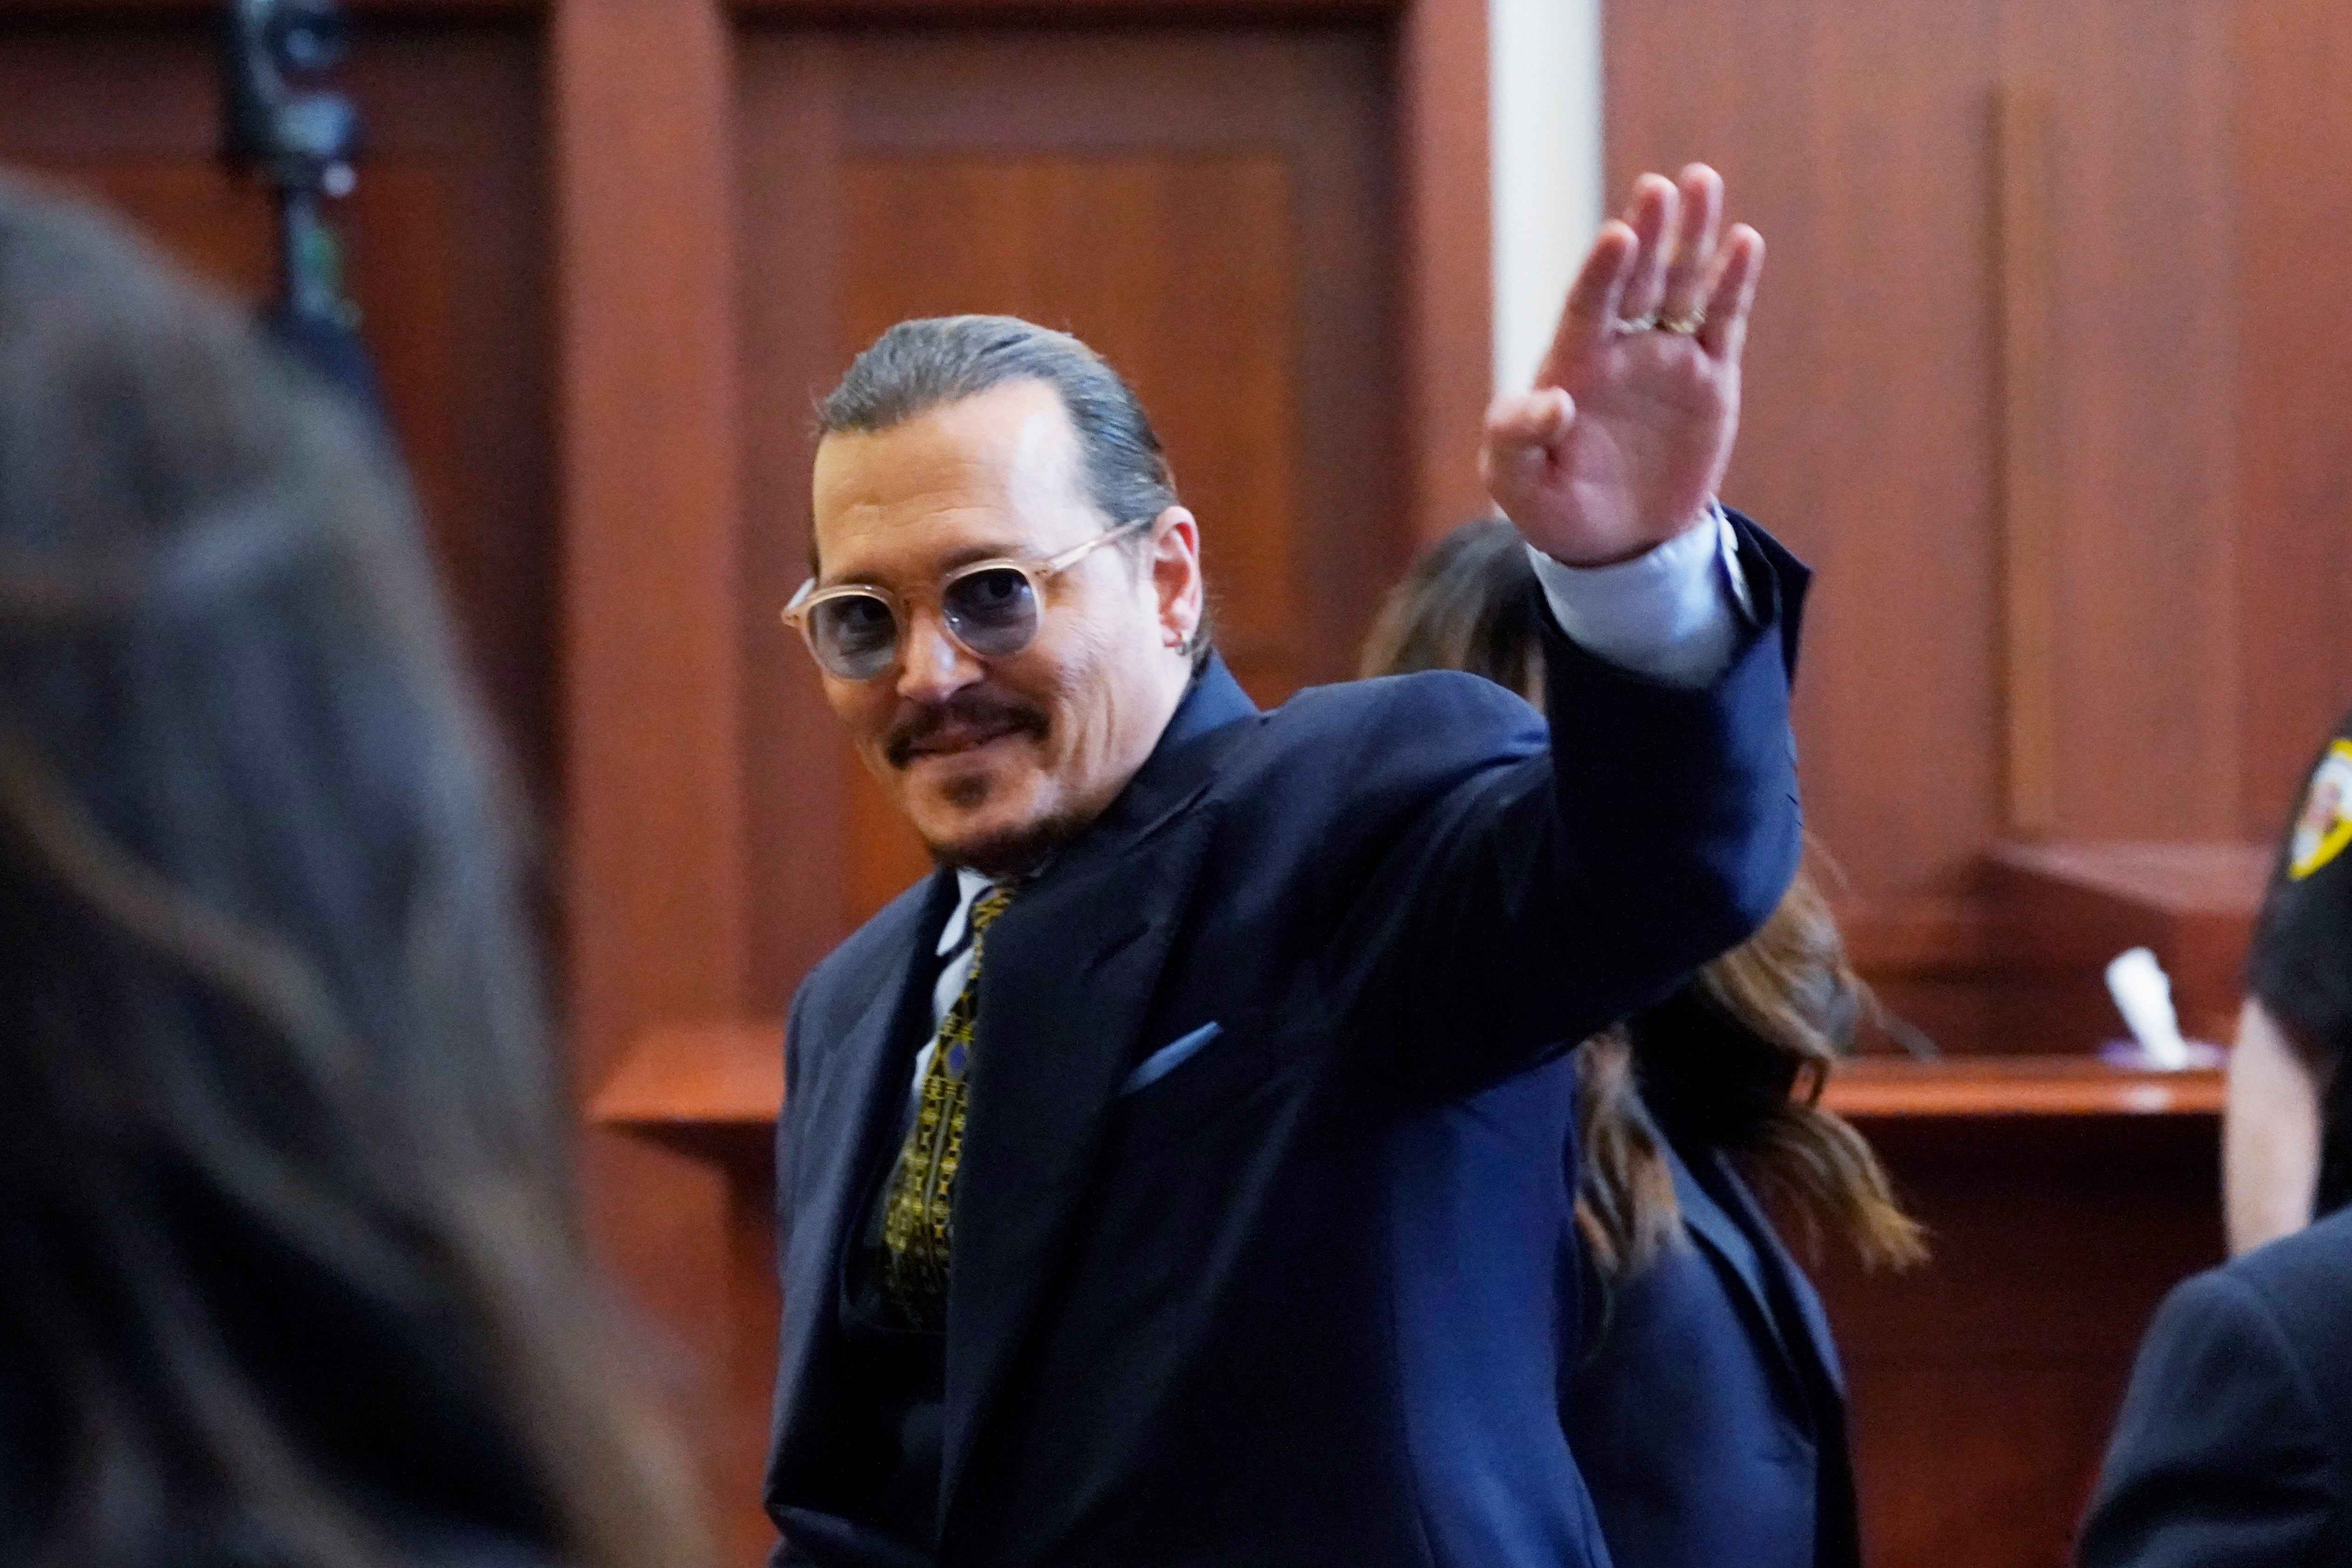 Mr Depp is suing Ms Heard for 50 million dollars (£40million) over which his lawyers say falsely implies he physically and sexually abused her while they were together (Steve Helber/AP)